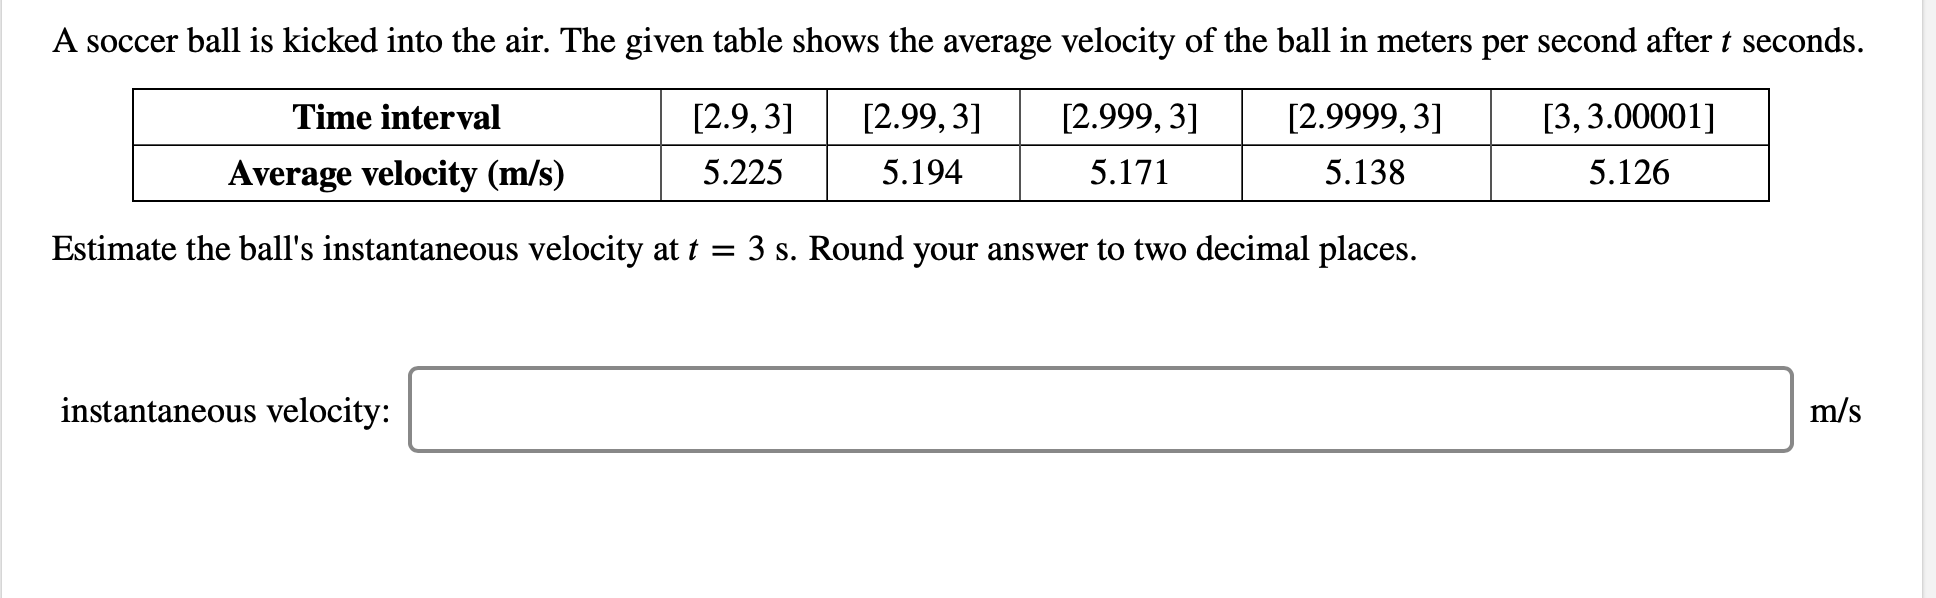 A soccer ball is kicked into the air. The given table shows the average velocity of the ball in meters per second aftert seconds
[2.9,3]
[2.99, 3]
[2.999, 3]
[2.9999, 3]
[3, 3.00001]
Time interval
5.225
5.194
5.171
5.138
5.126
Average velocity (m/s)
Estimate the ball's instantaneous velocity at t
3 s. Round your answer to two decimal places.
instantaneous velocity:
m/s
